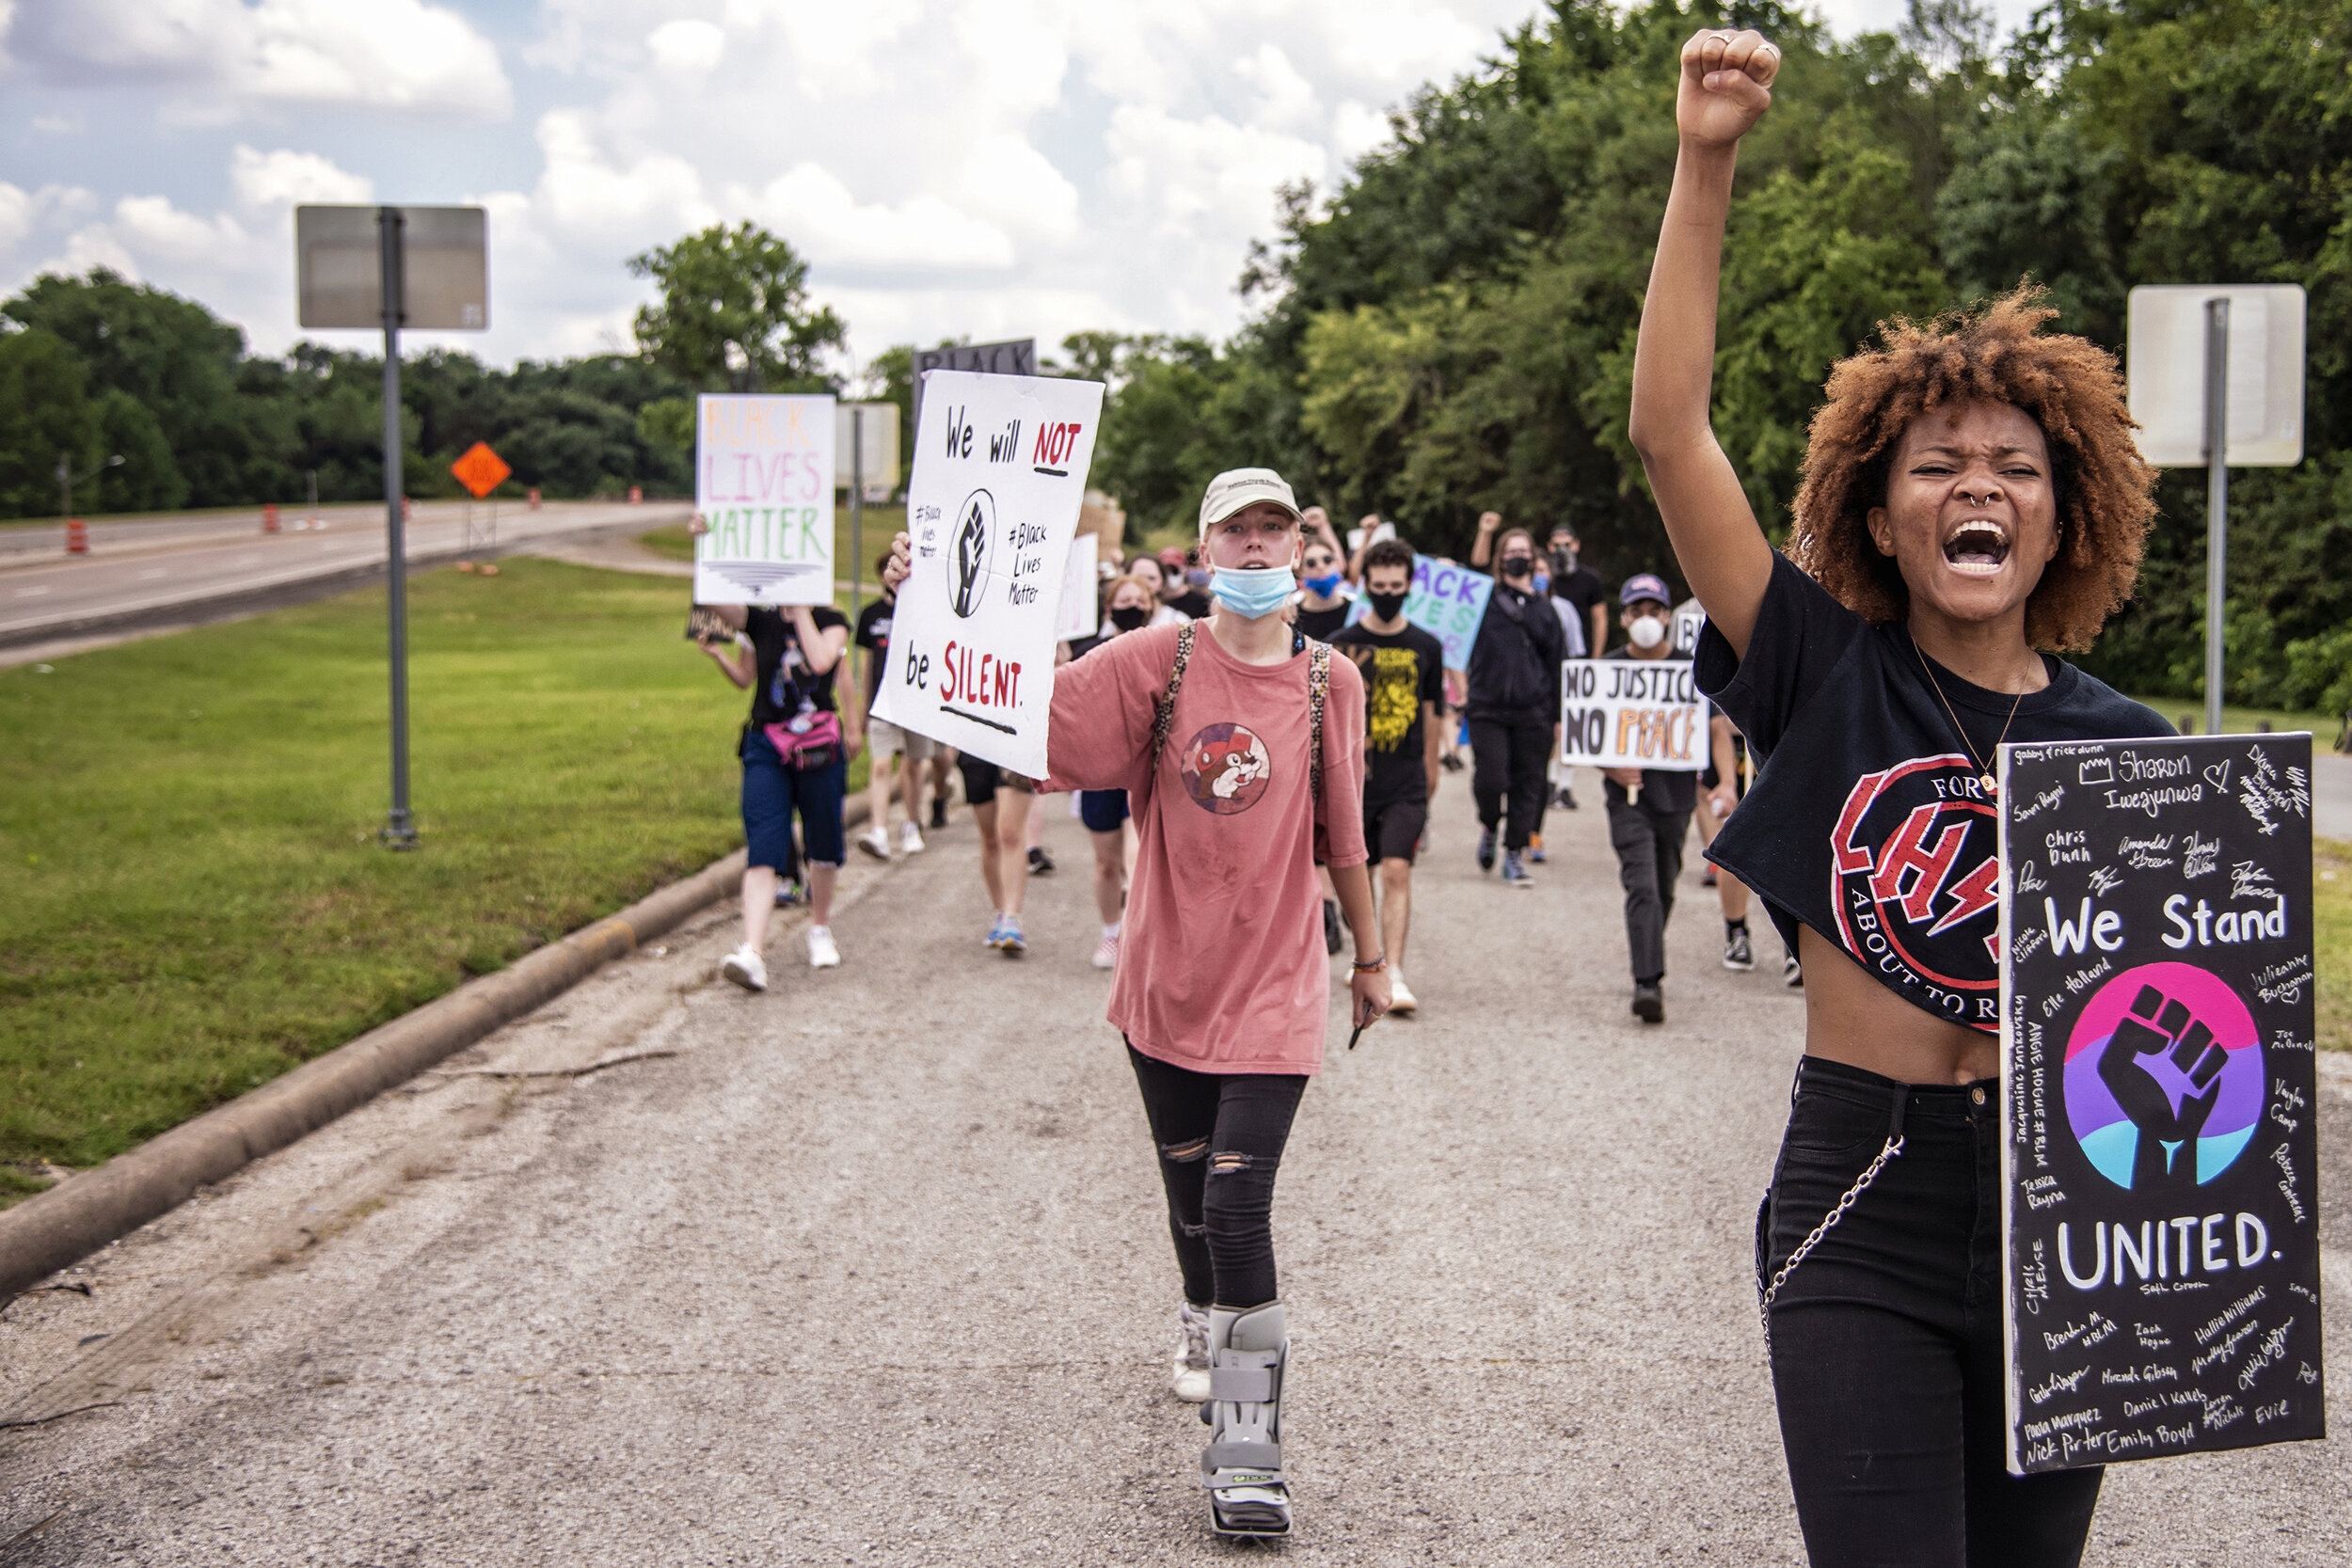  Protesters against racism and police brutality march near White Rock Lake in Dallas, TX on June 2, 2020.   The protest was organized by Emily Boyd (center) and Sharon Iweajunwa (right), both 2019 graduates of Lake Highlands High School.  “Our goal w